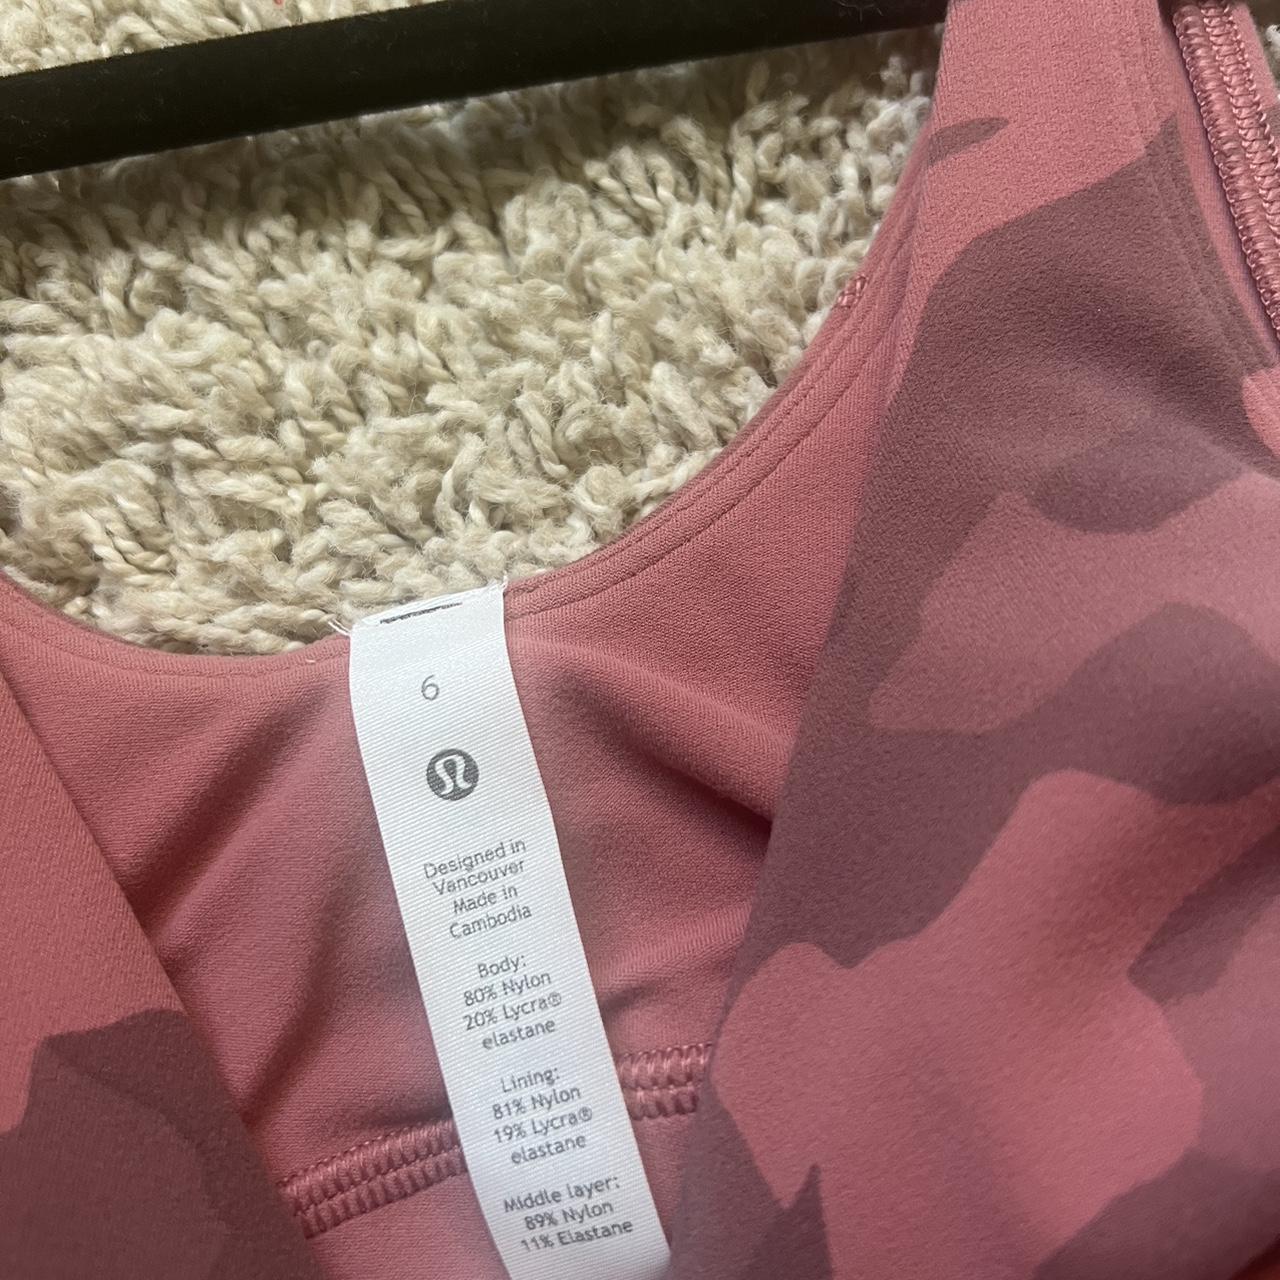 Red/Pink Camo Align Tank Size 6 Never worn Perfect - Depop